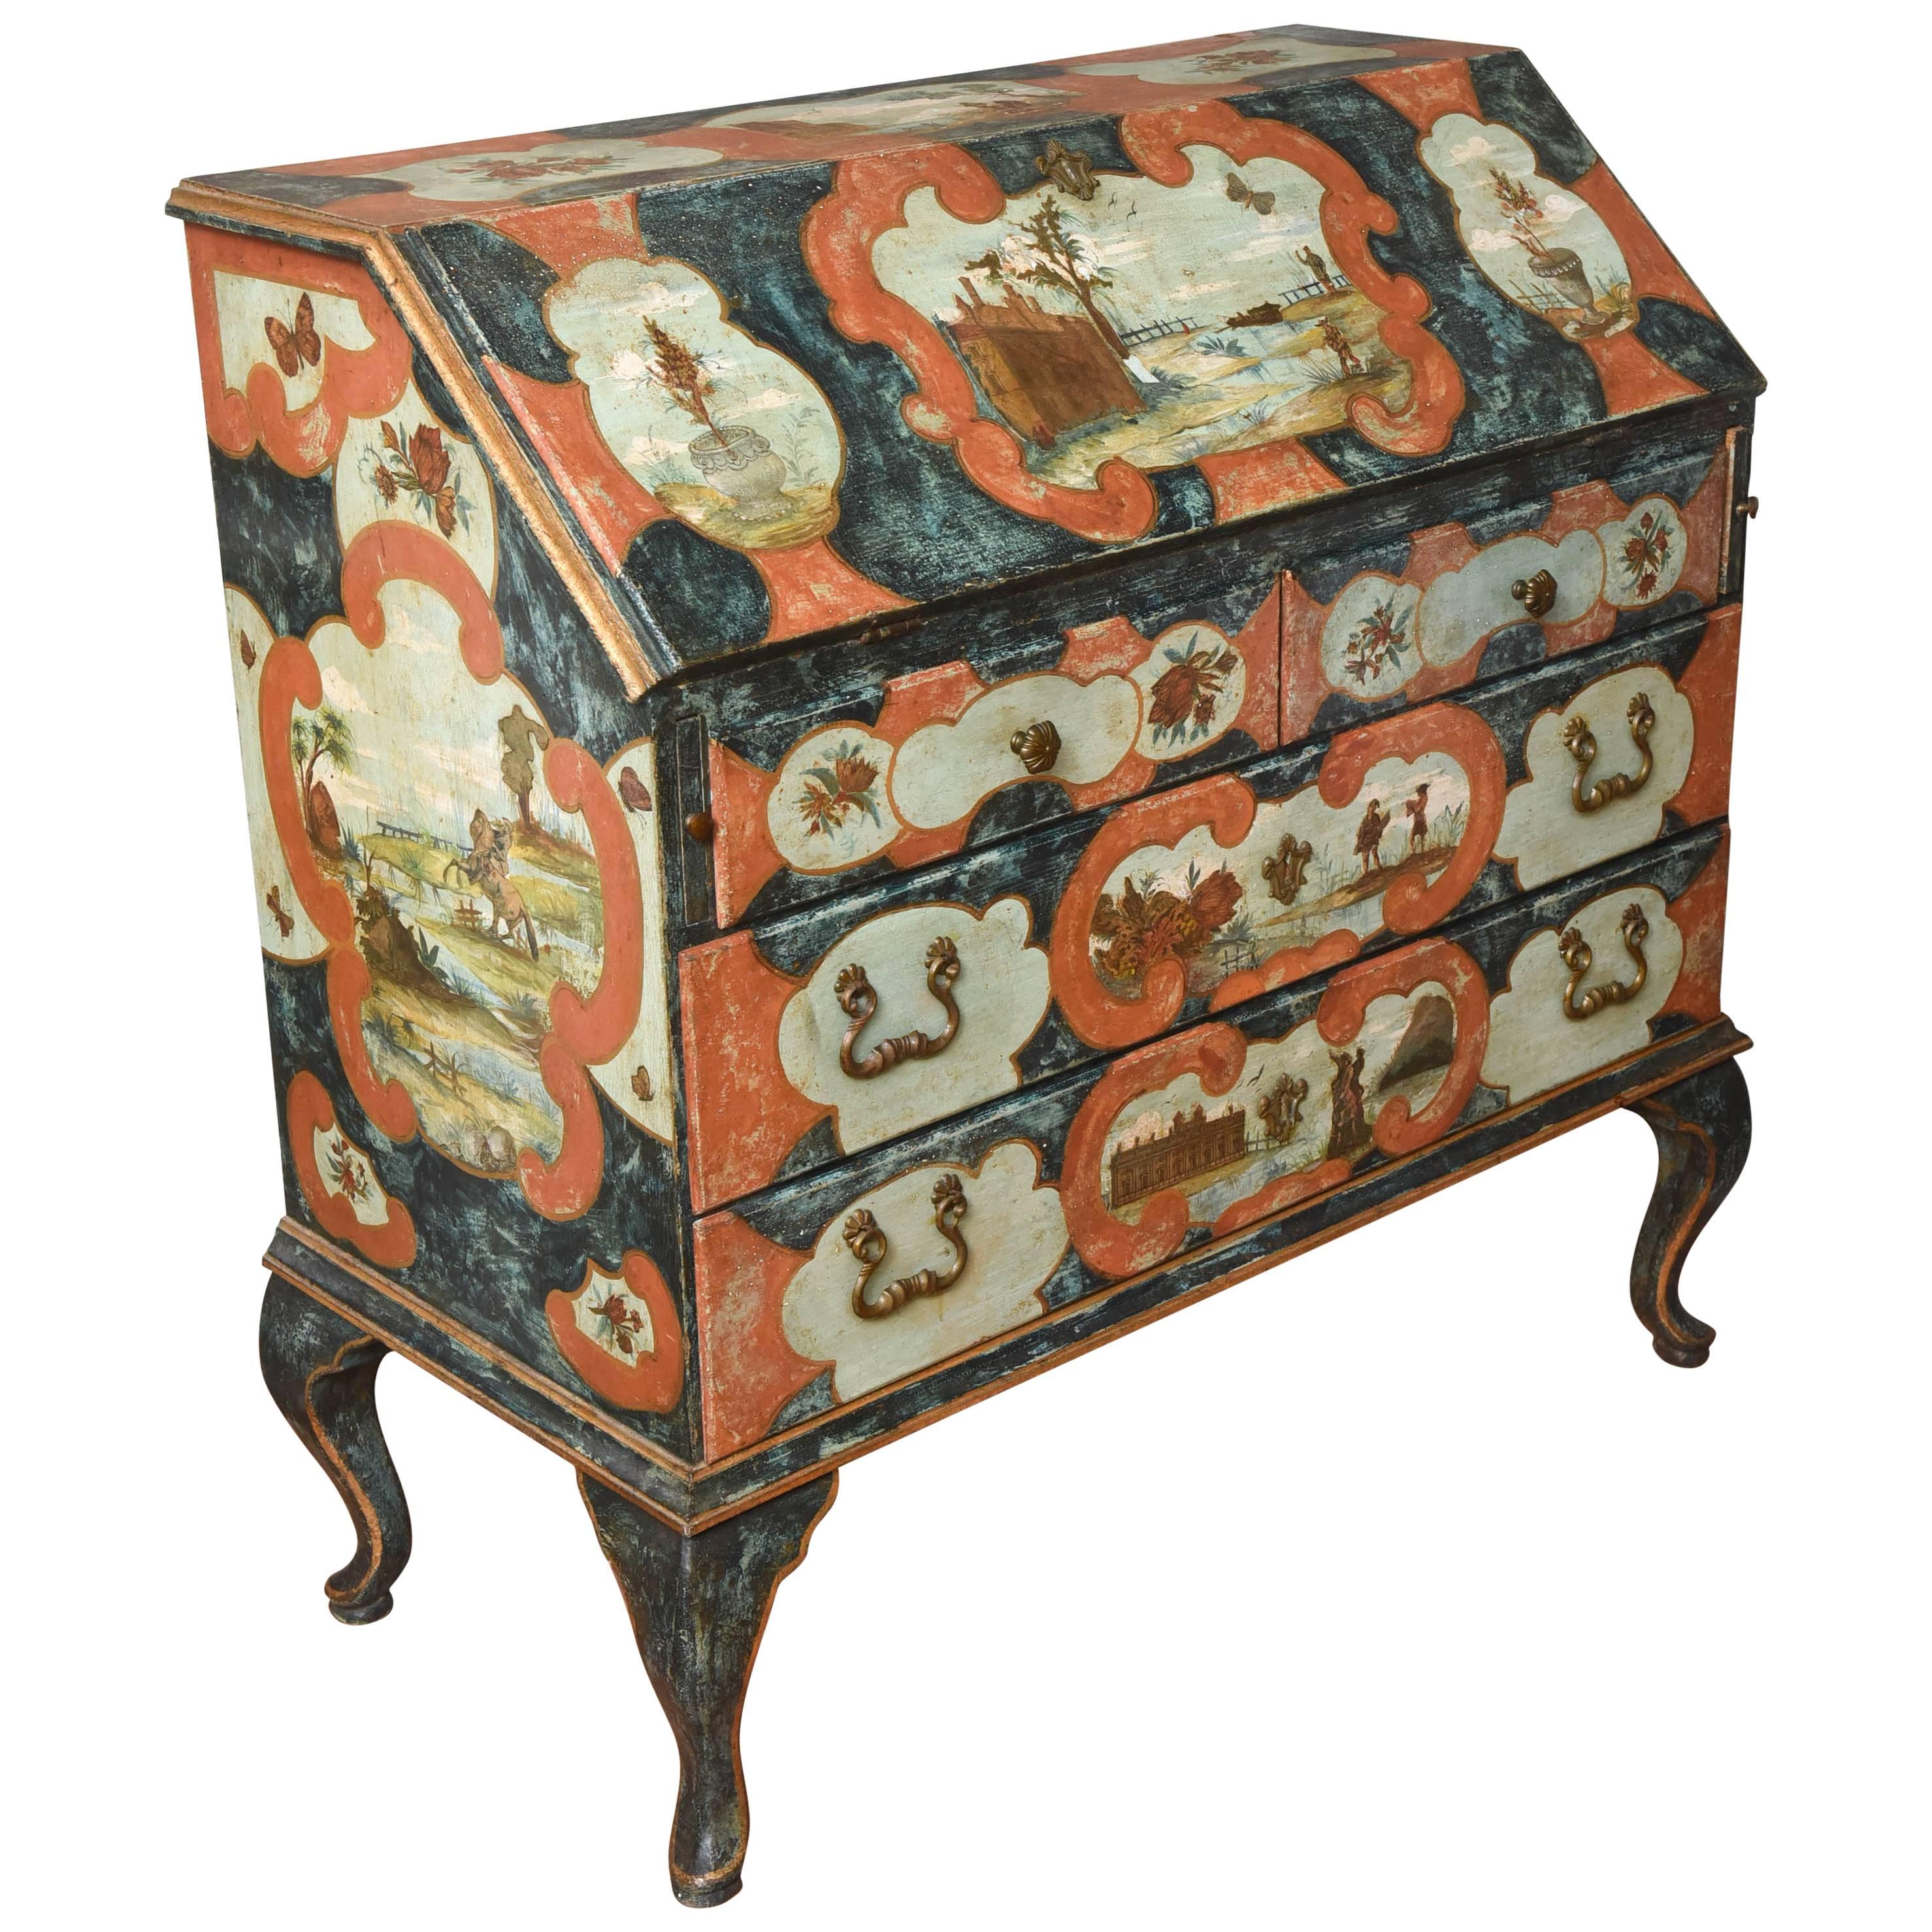 Italian Painted and Decoupage Secretaire